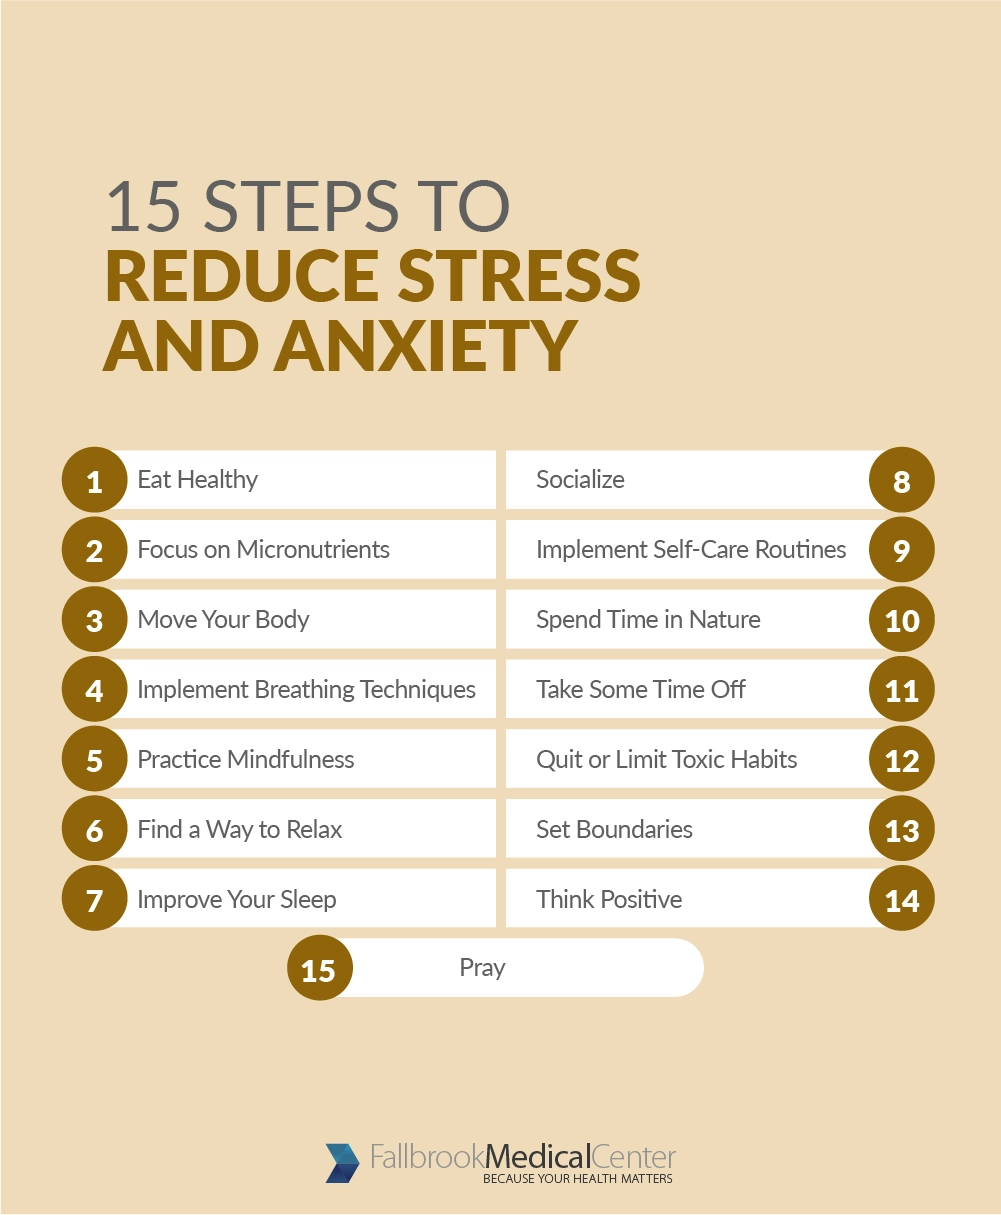 15 Steps to Reduce Stress and Anxiety